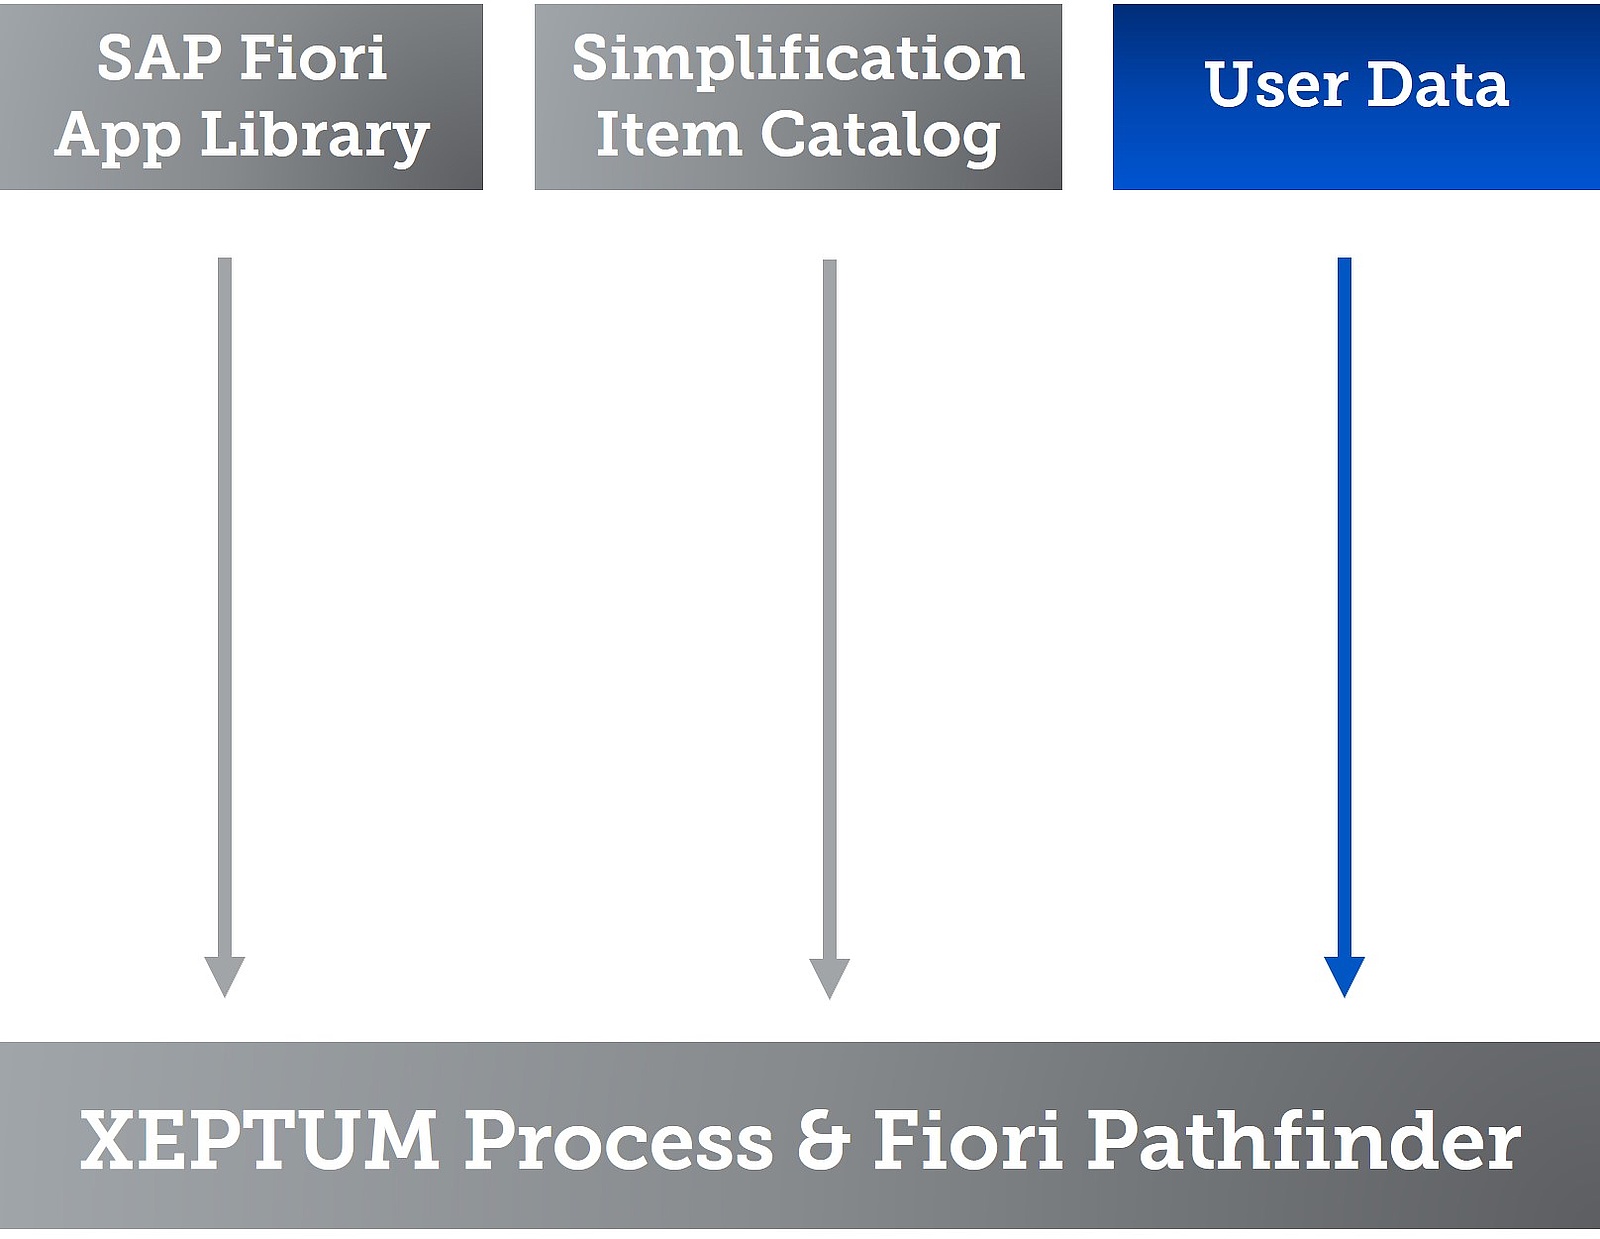 Consolidation of various sources to determine the Fiori apps needed